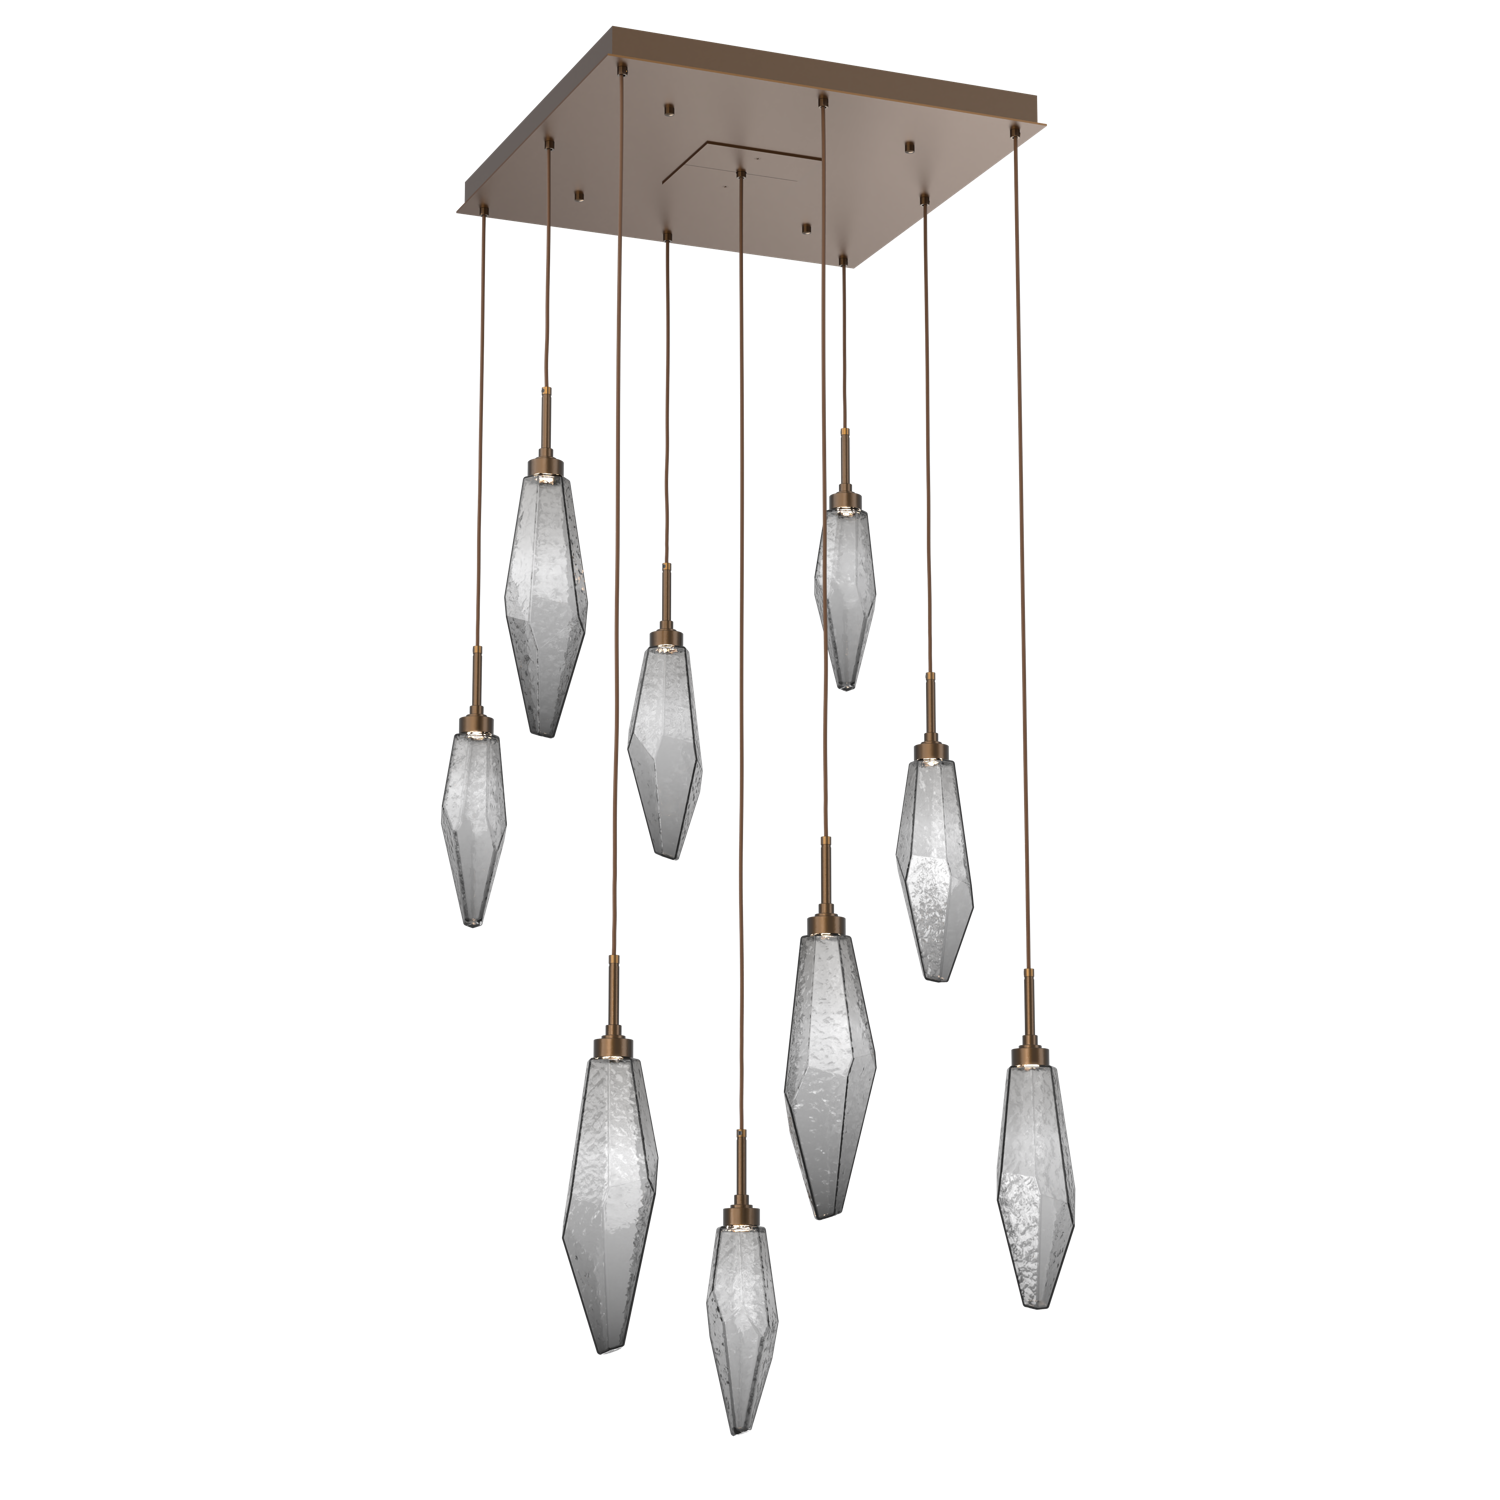 CHB0050-09-FB-CS-Hammerton-Studio-Rock-Crystal-9-light-square-pendant-chandelier-with-flat-bronze-finish-and-chilled-smoke-glass-shades-and-LED-lamping